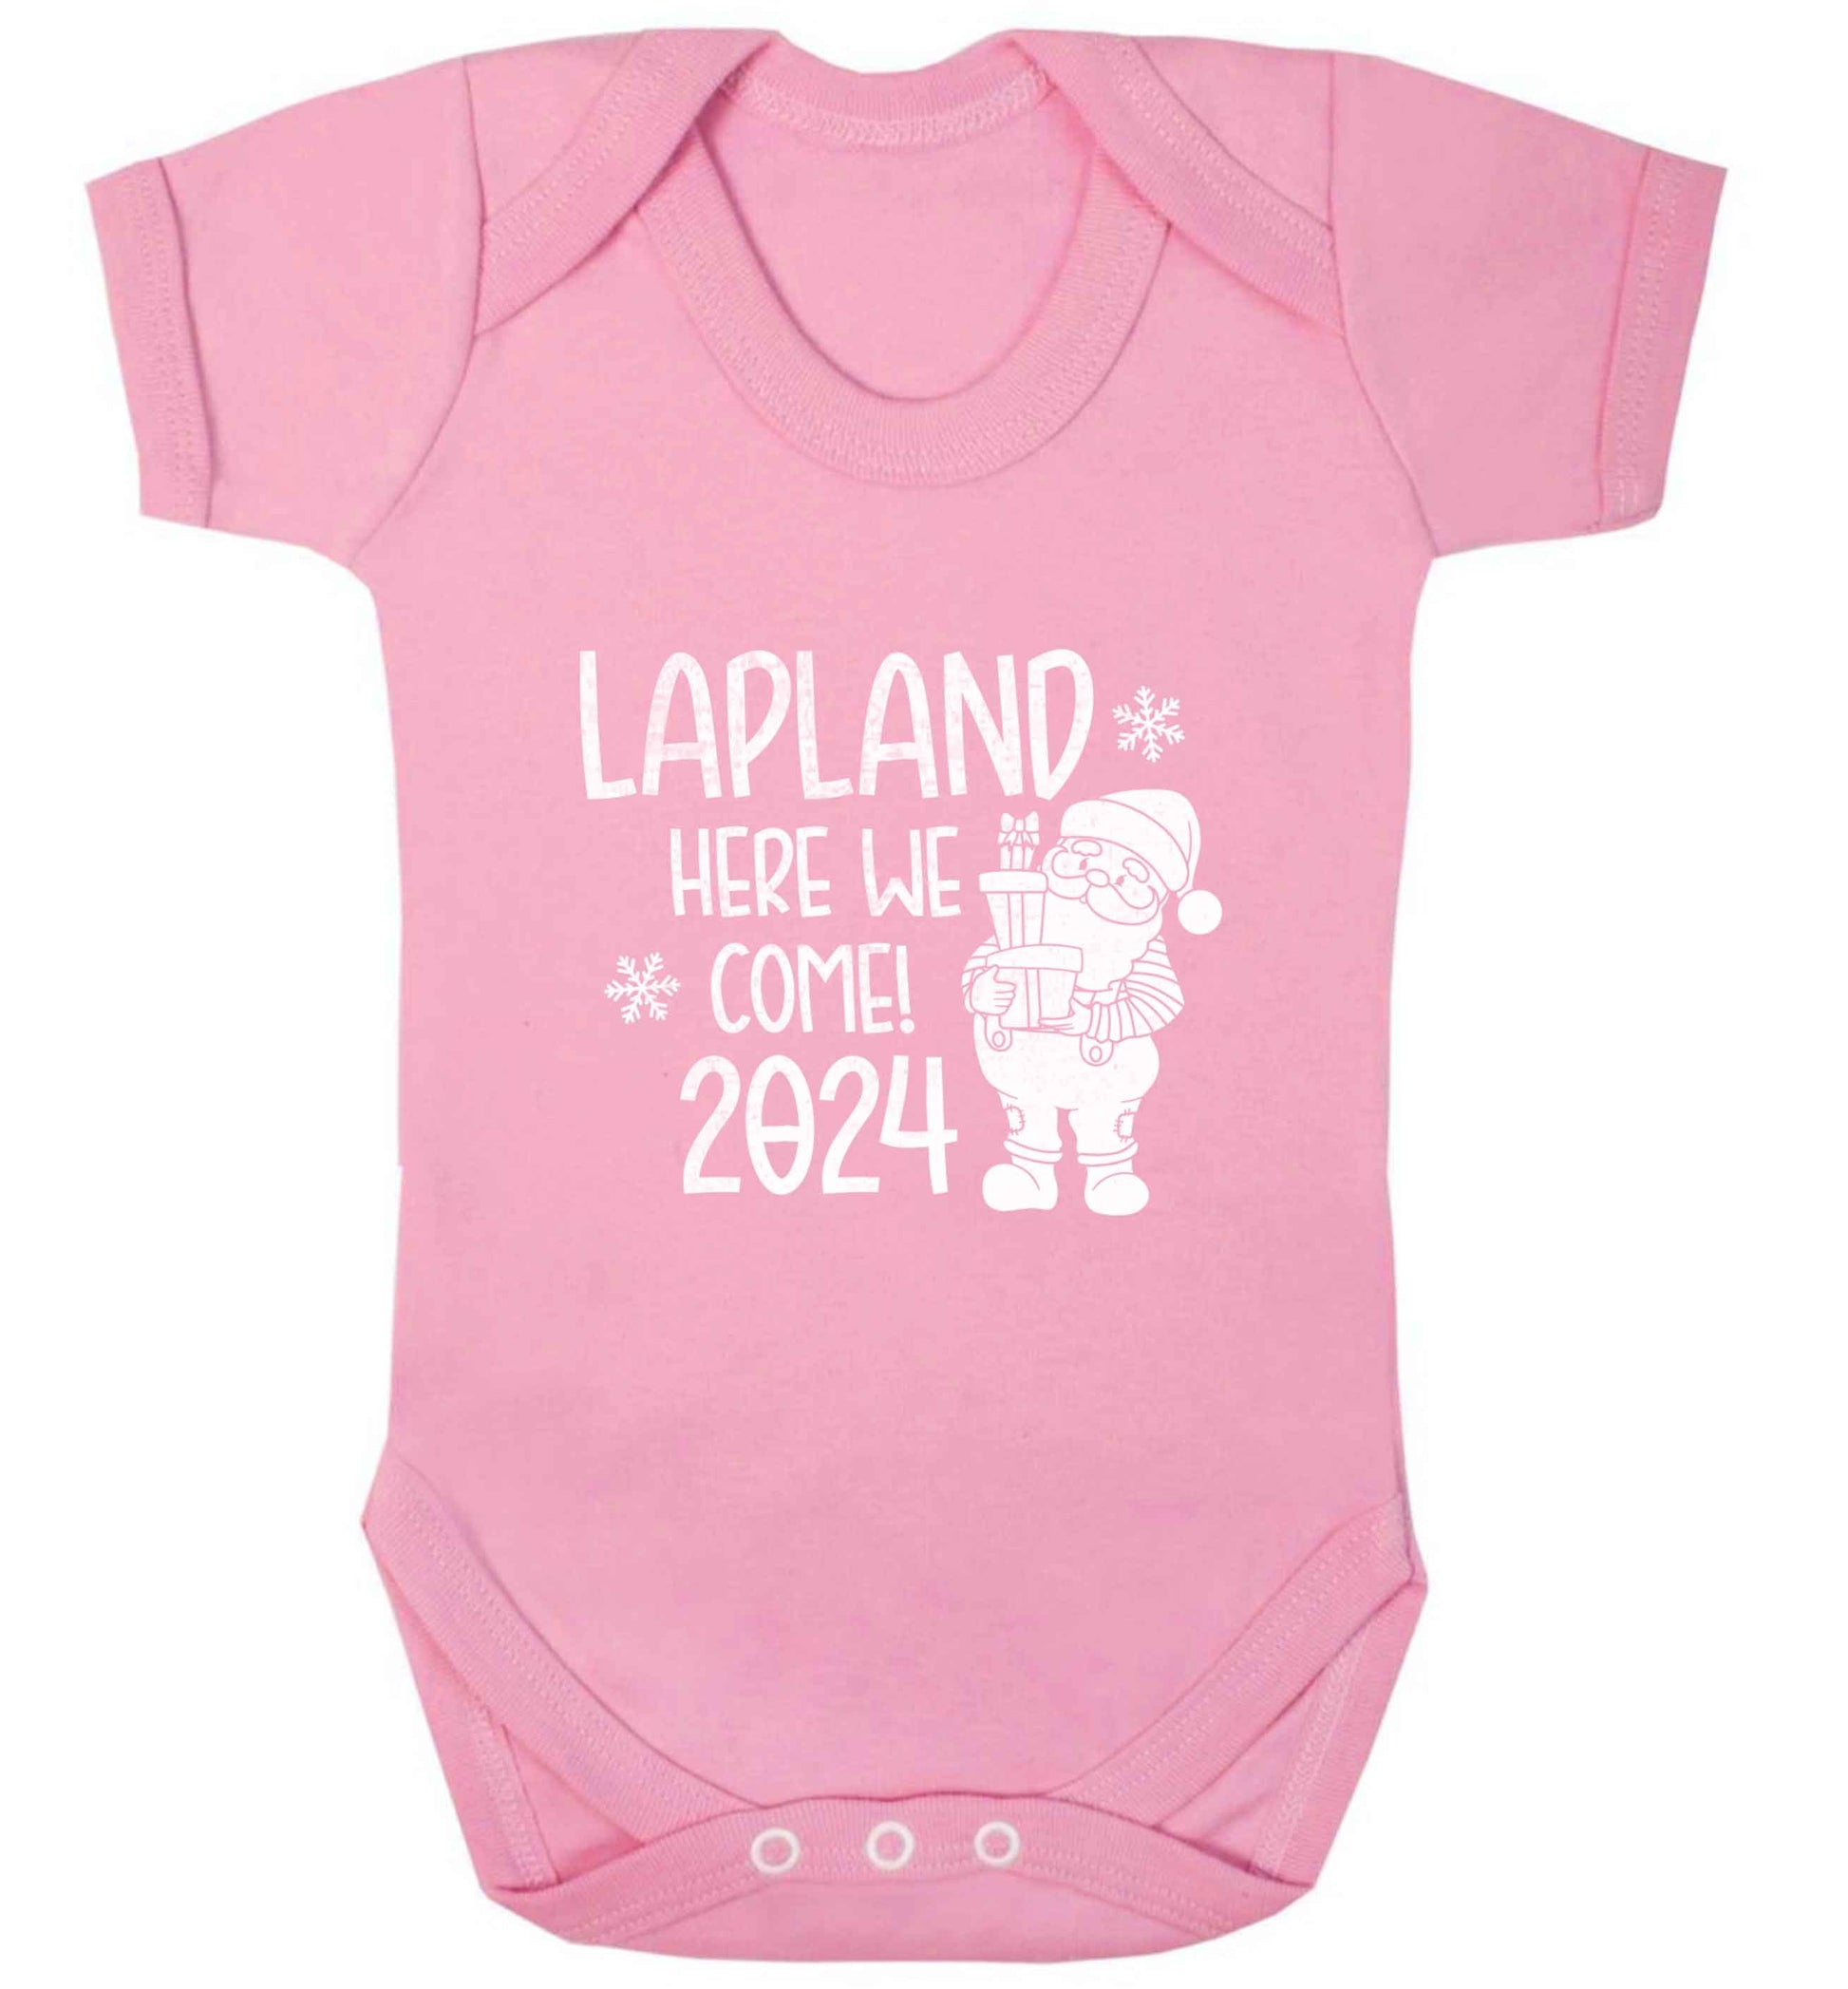 Lapland here we come baby vest pale pink 18-24 months